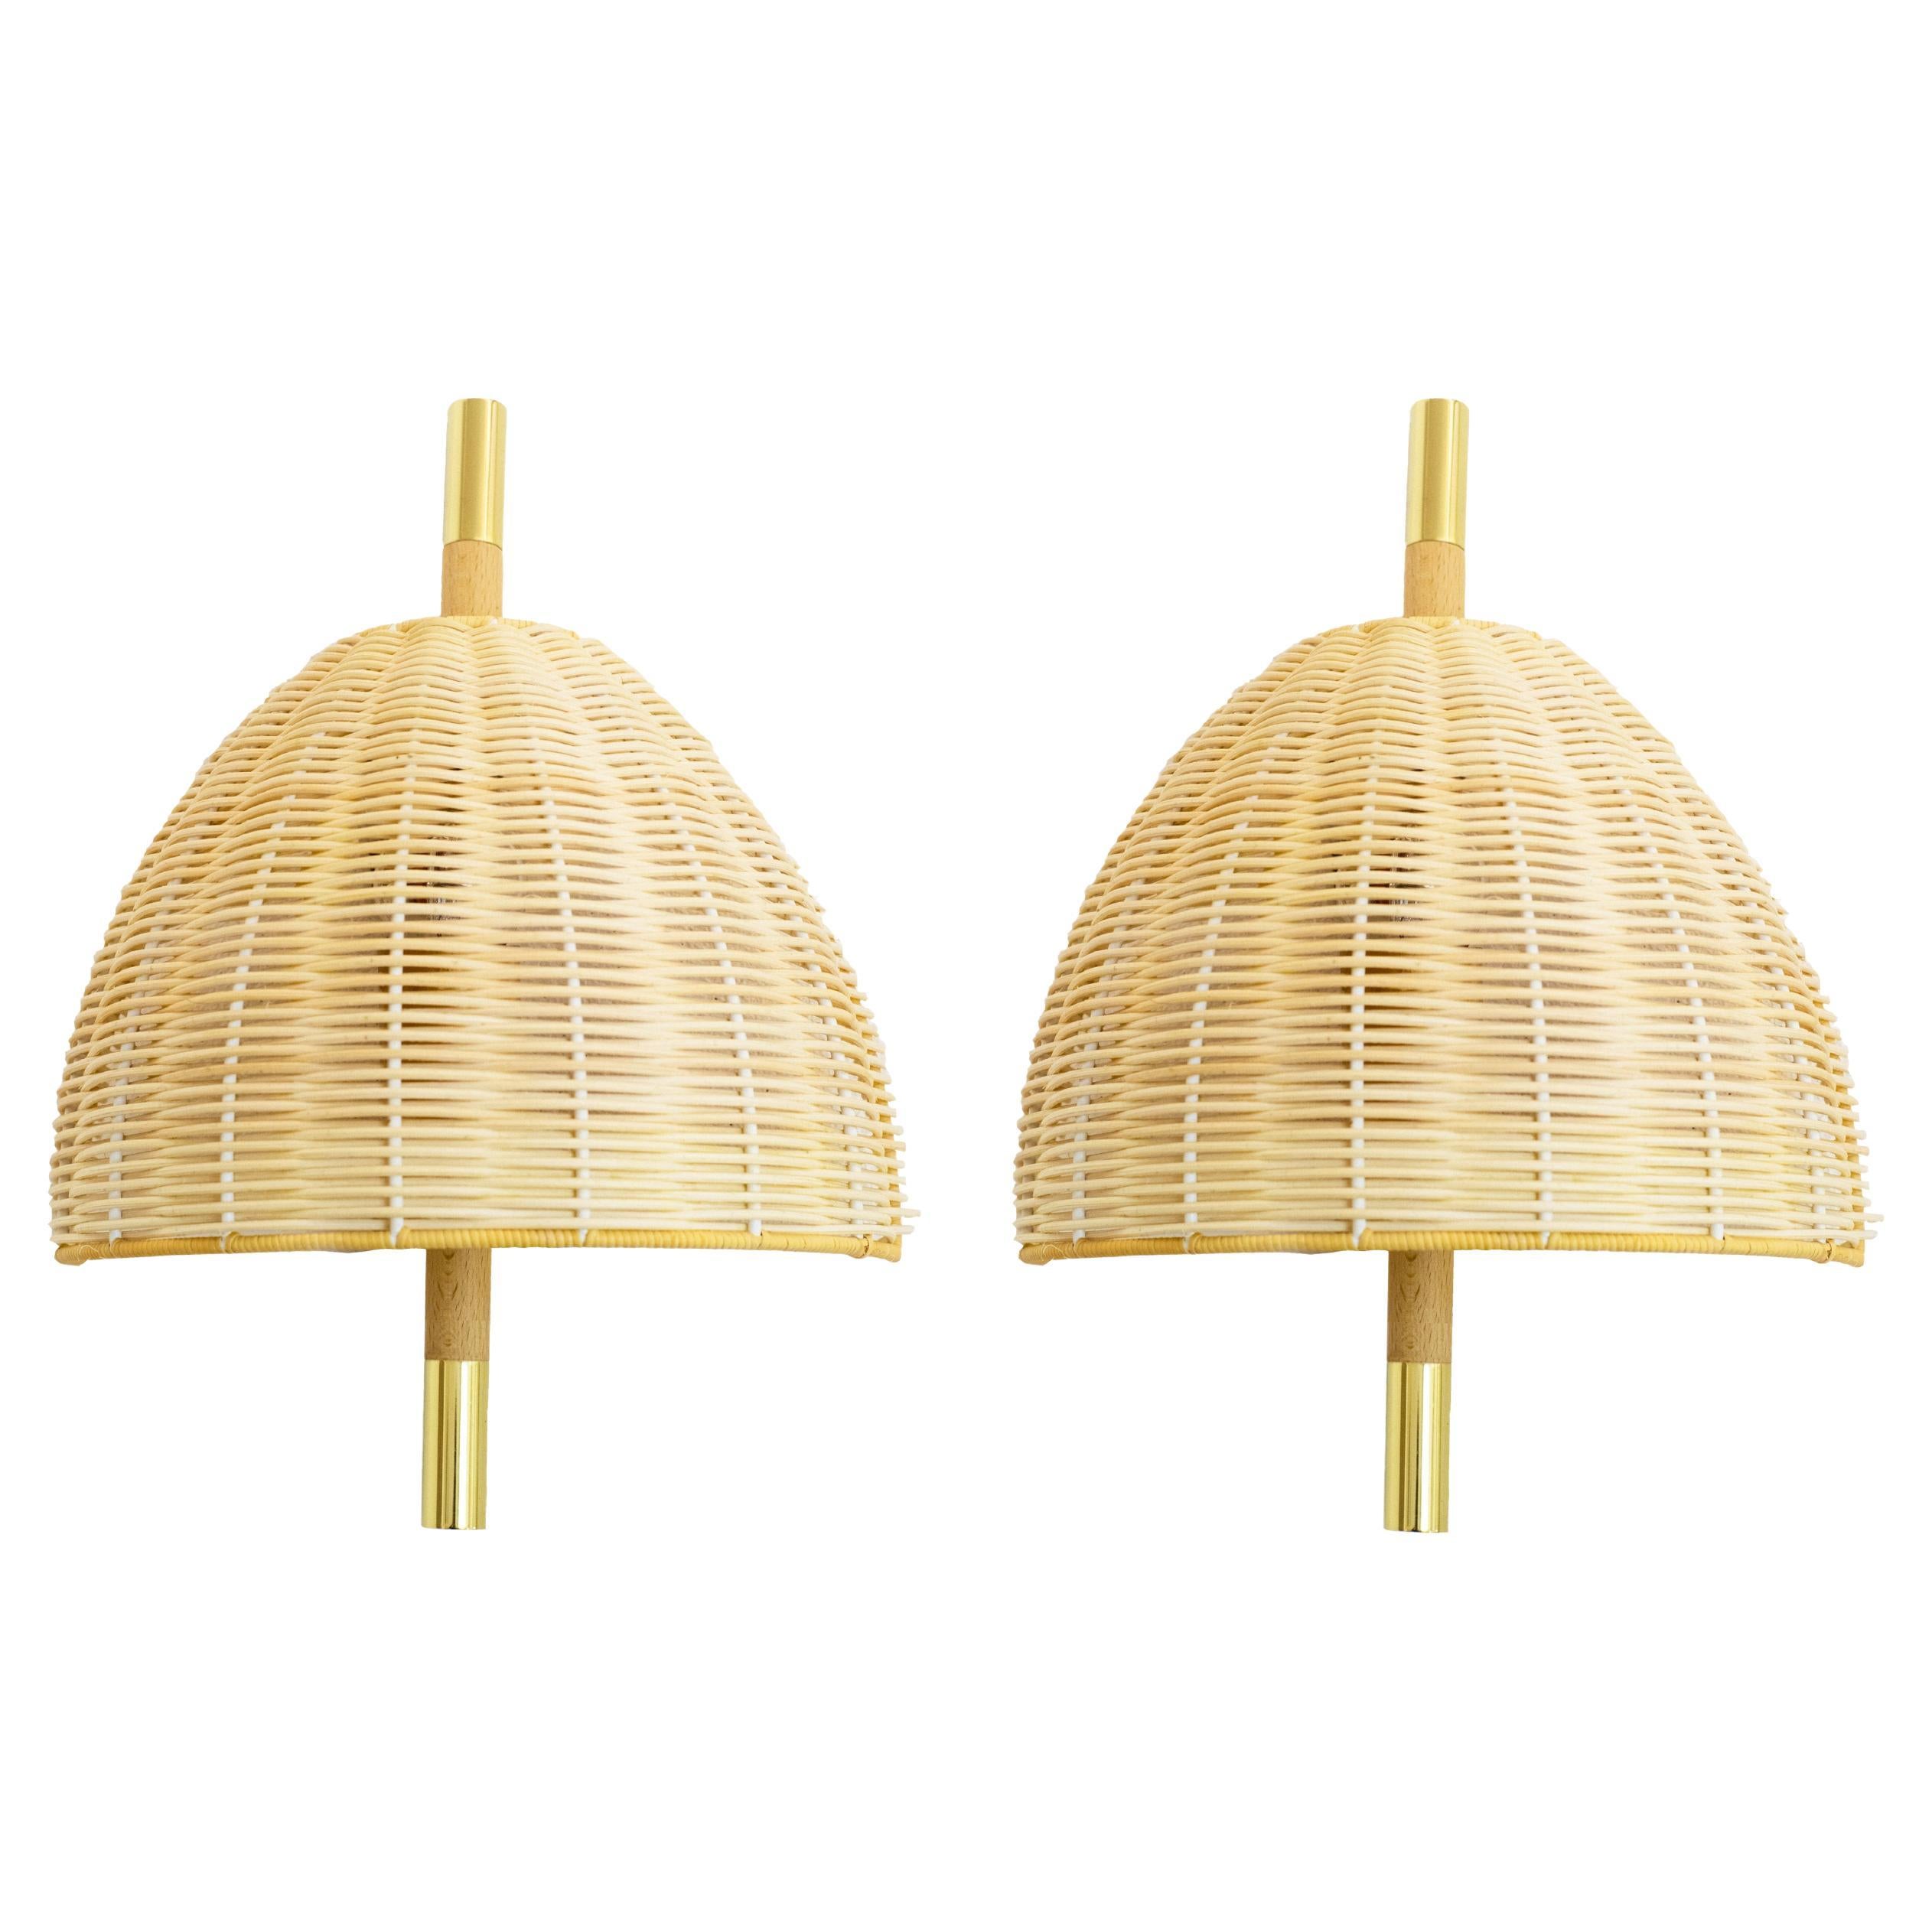 Pair of, Handmade, Wall Lamp, Natural Rattan Brass, Mediterranean Objects For Sale